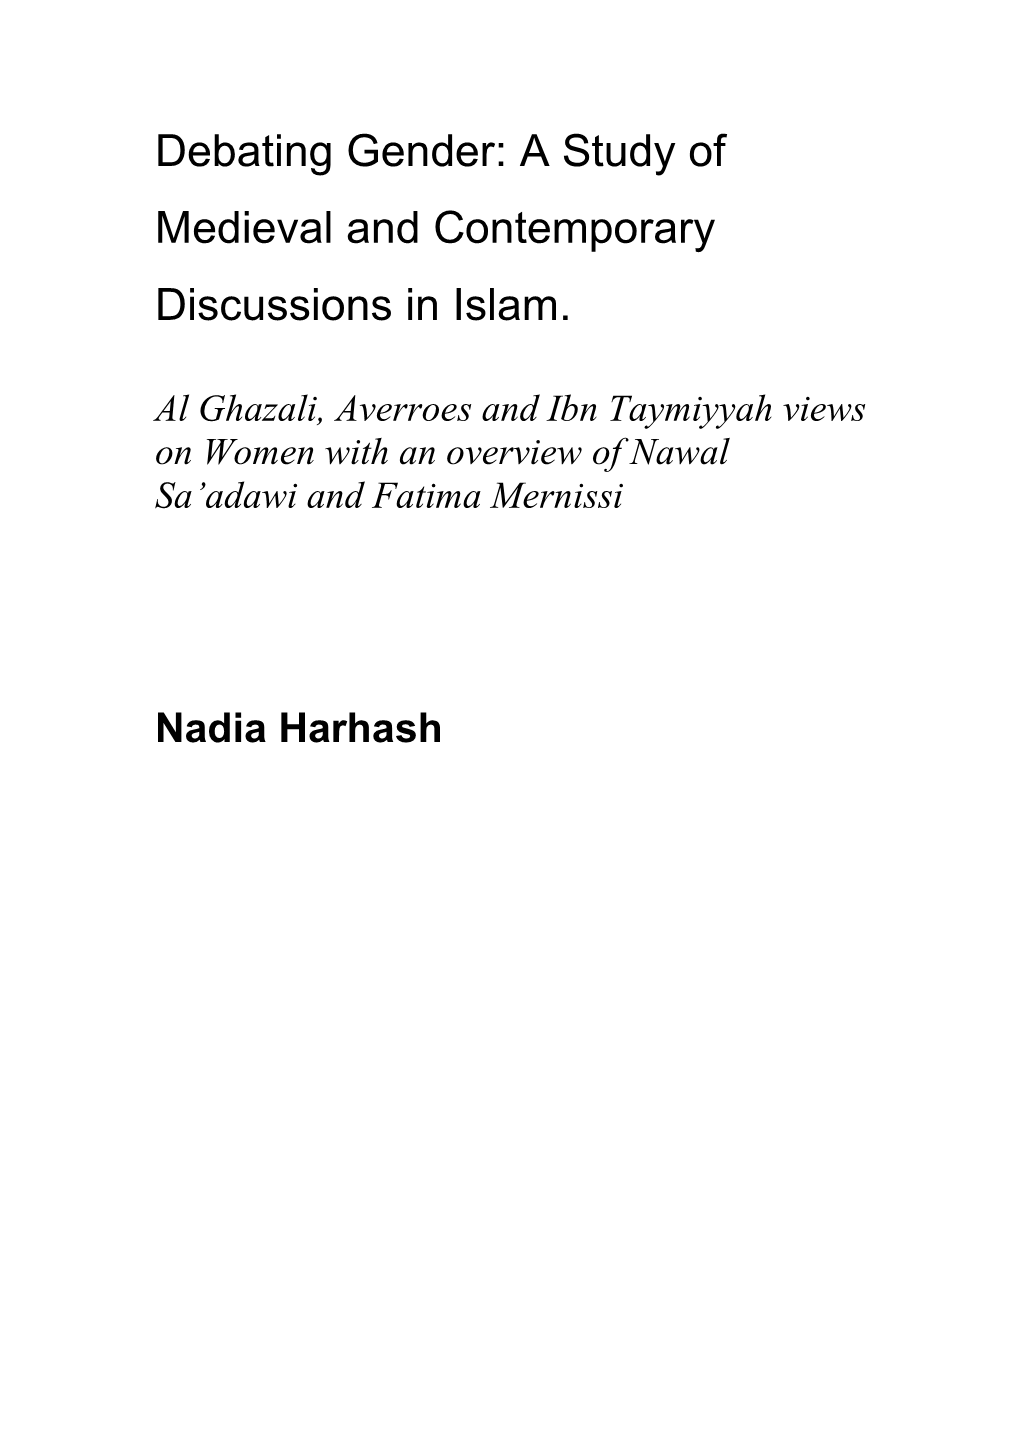 A Study of Medieval and Contemporary Discussions in Islam